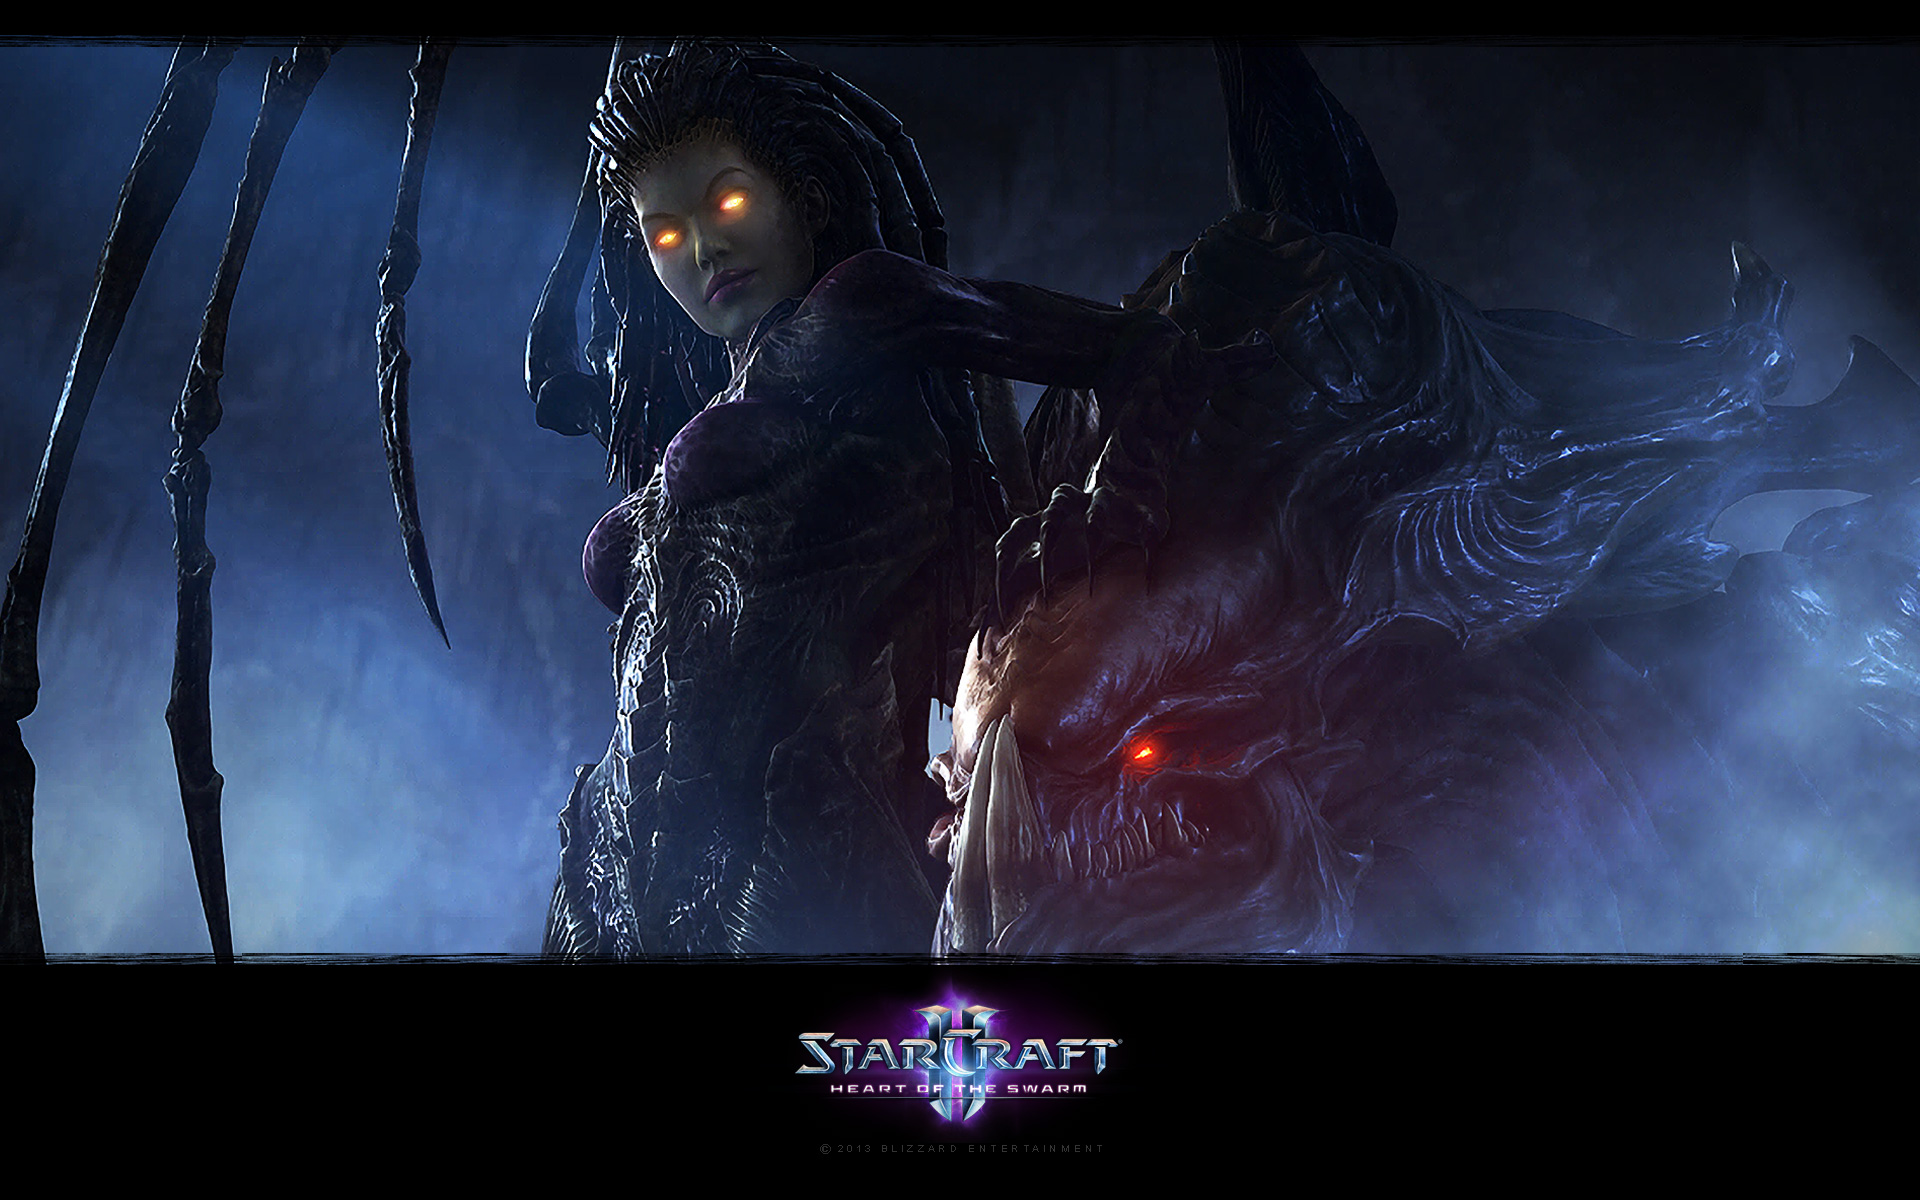 Starcraft Ii StarCraft Ii Heart Of The Swarm Zerg Video Games Video Game Art Video Game Characters V 1920x1200